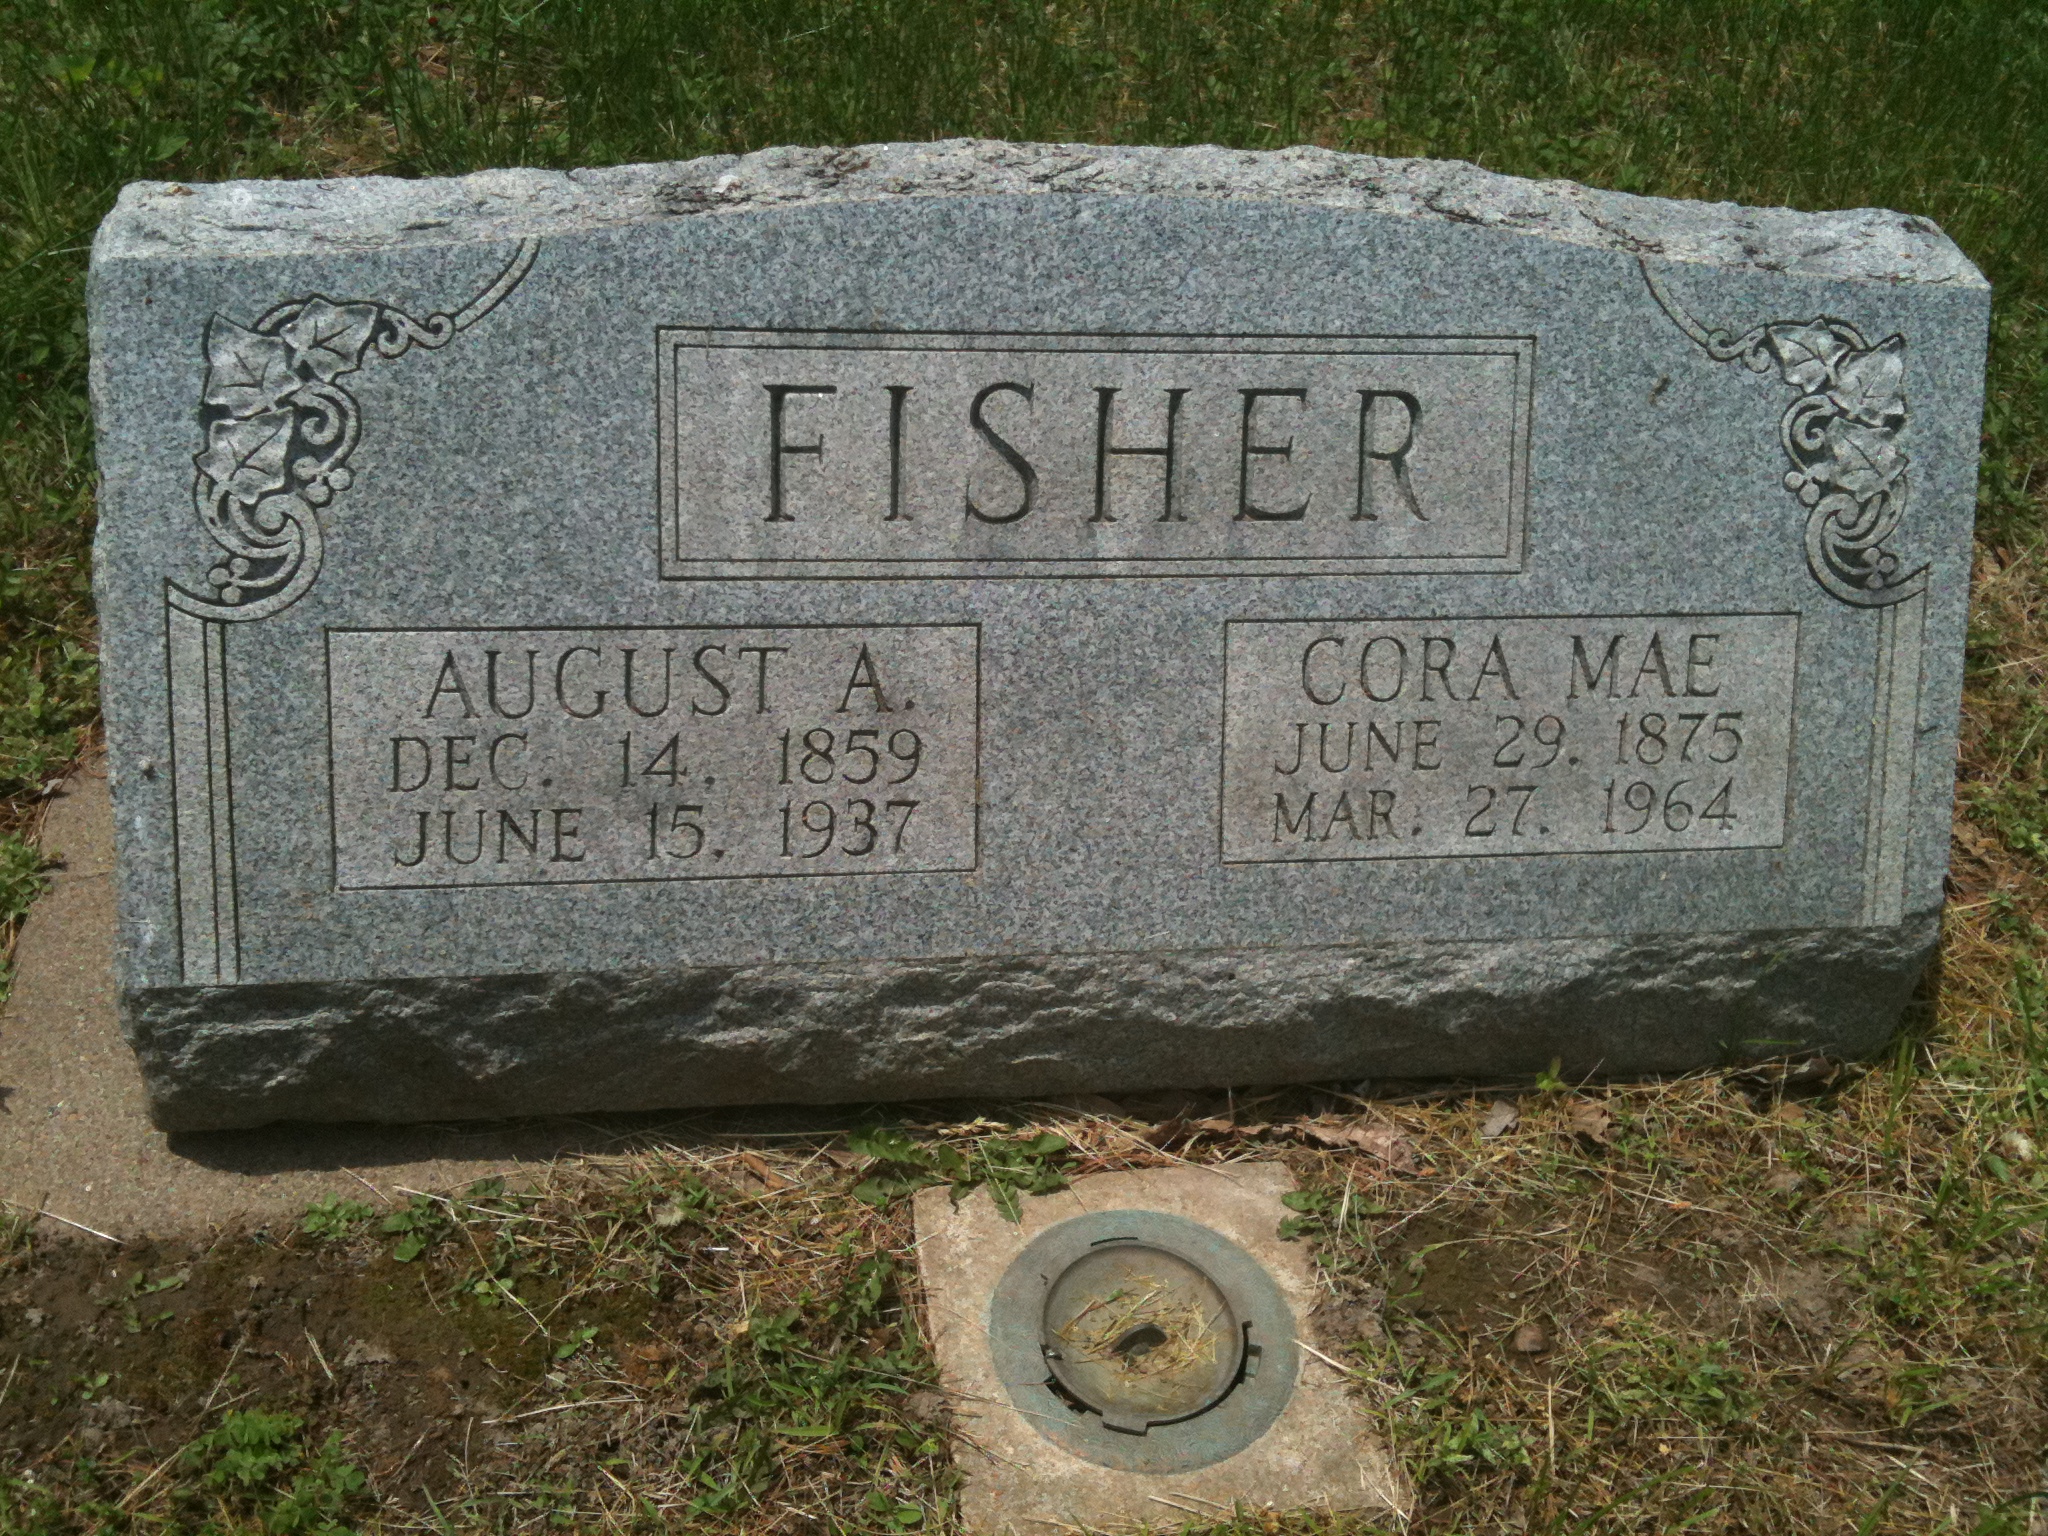 August A. and Cora Mae FisherHeadstone